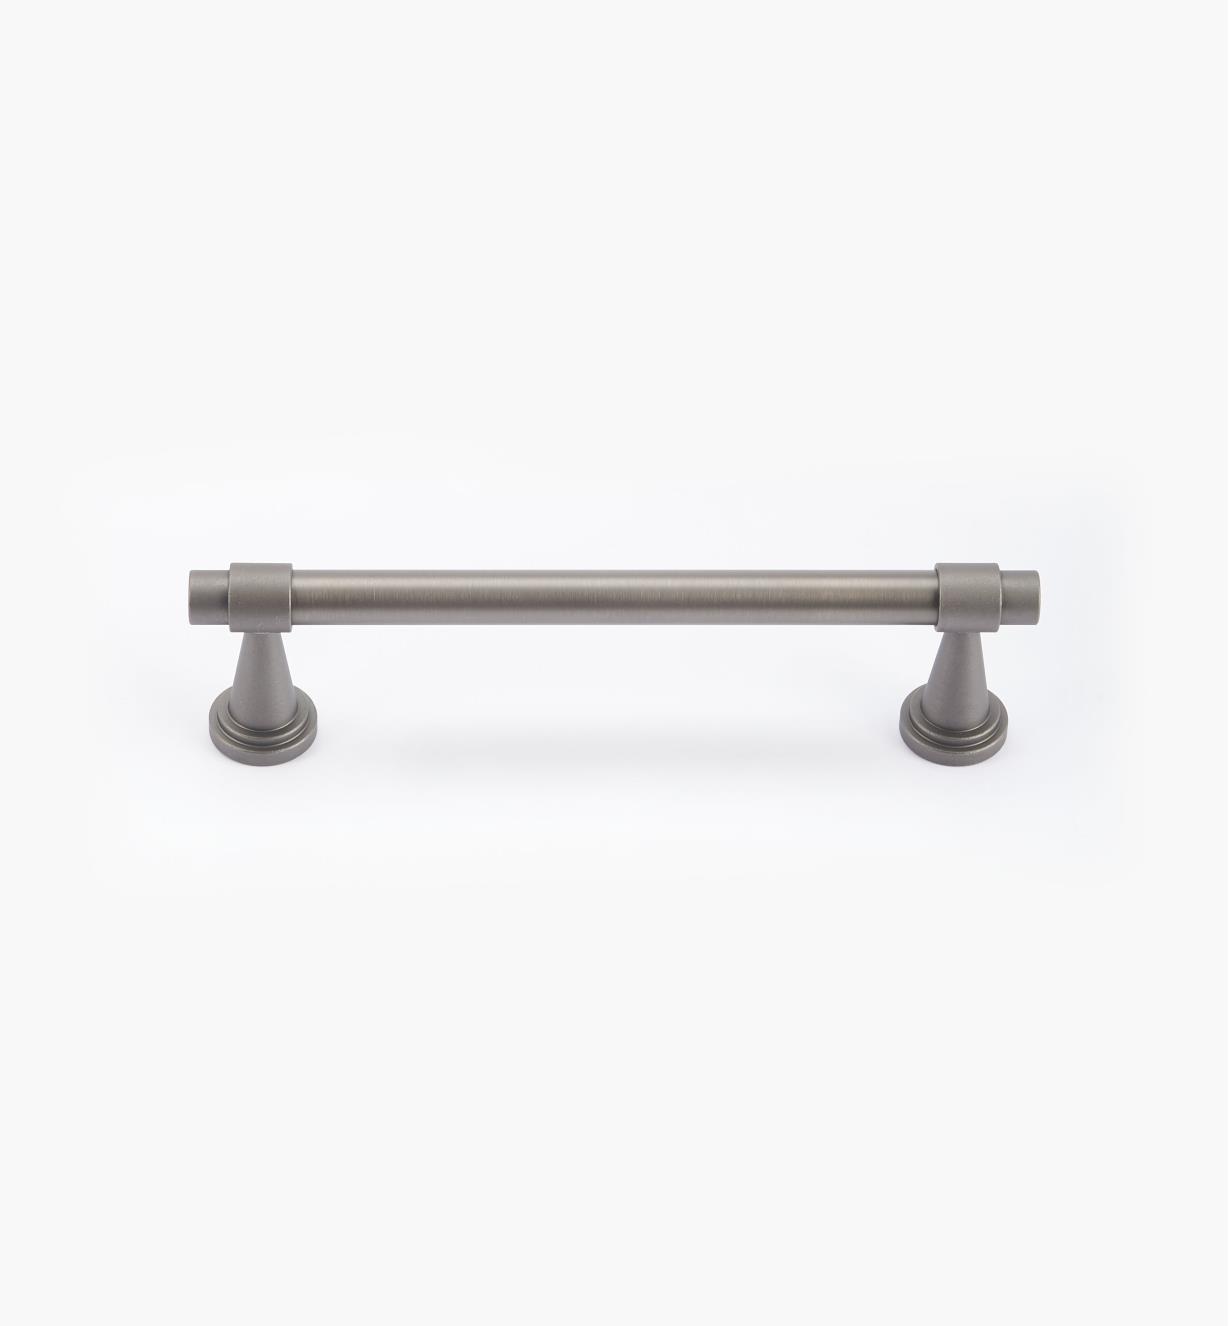 00W0726 - Concerto Hardware - 160mm Pewter Handle